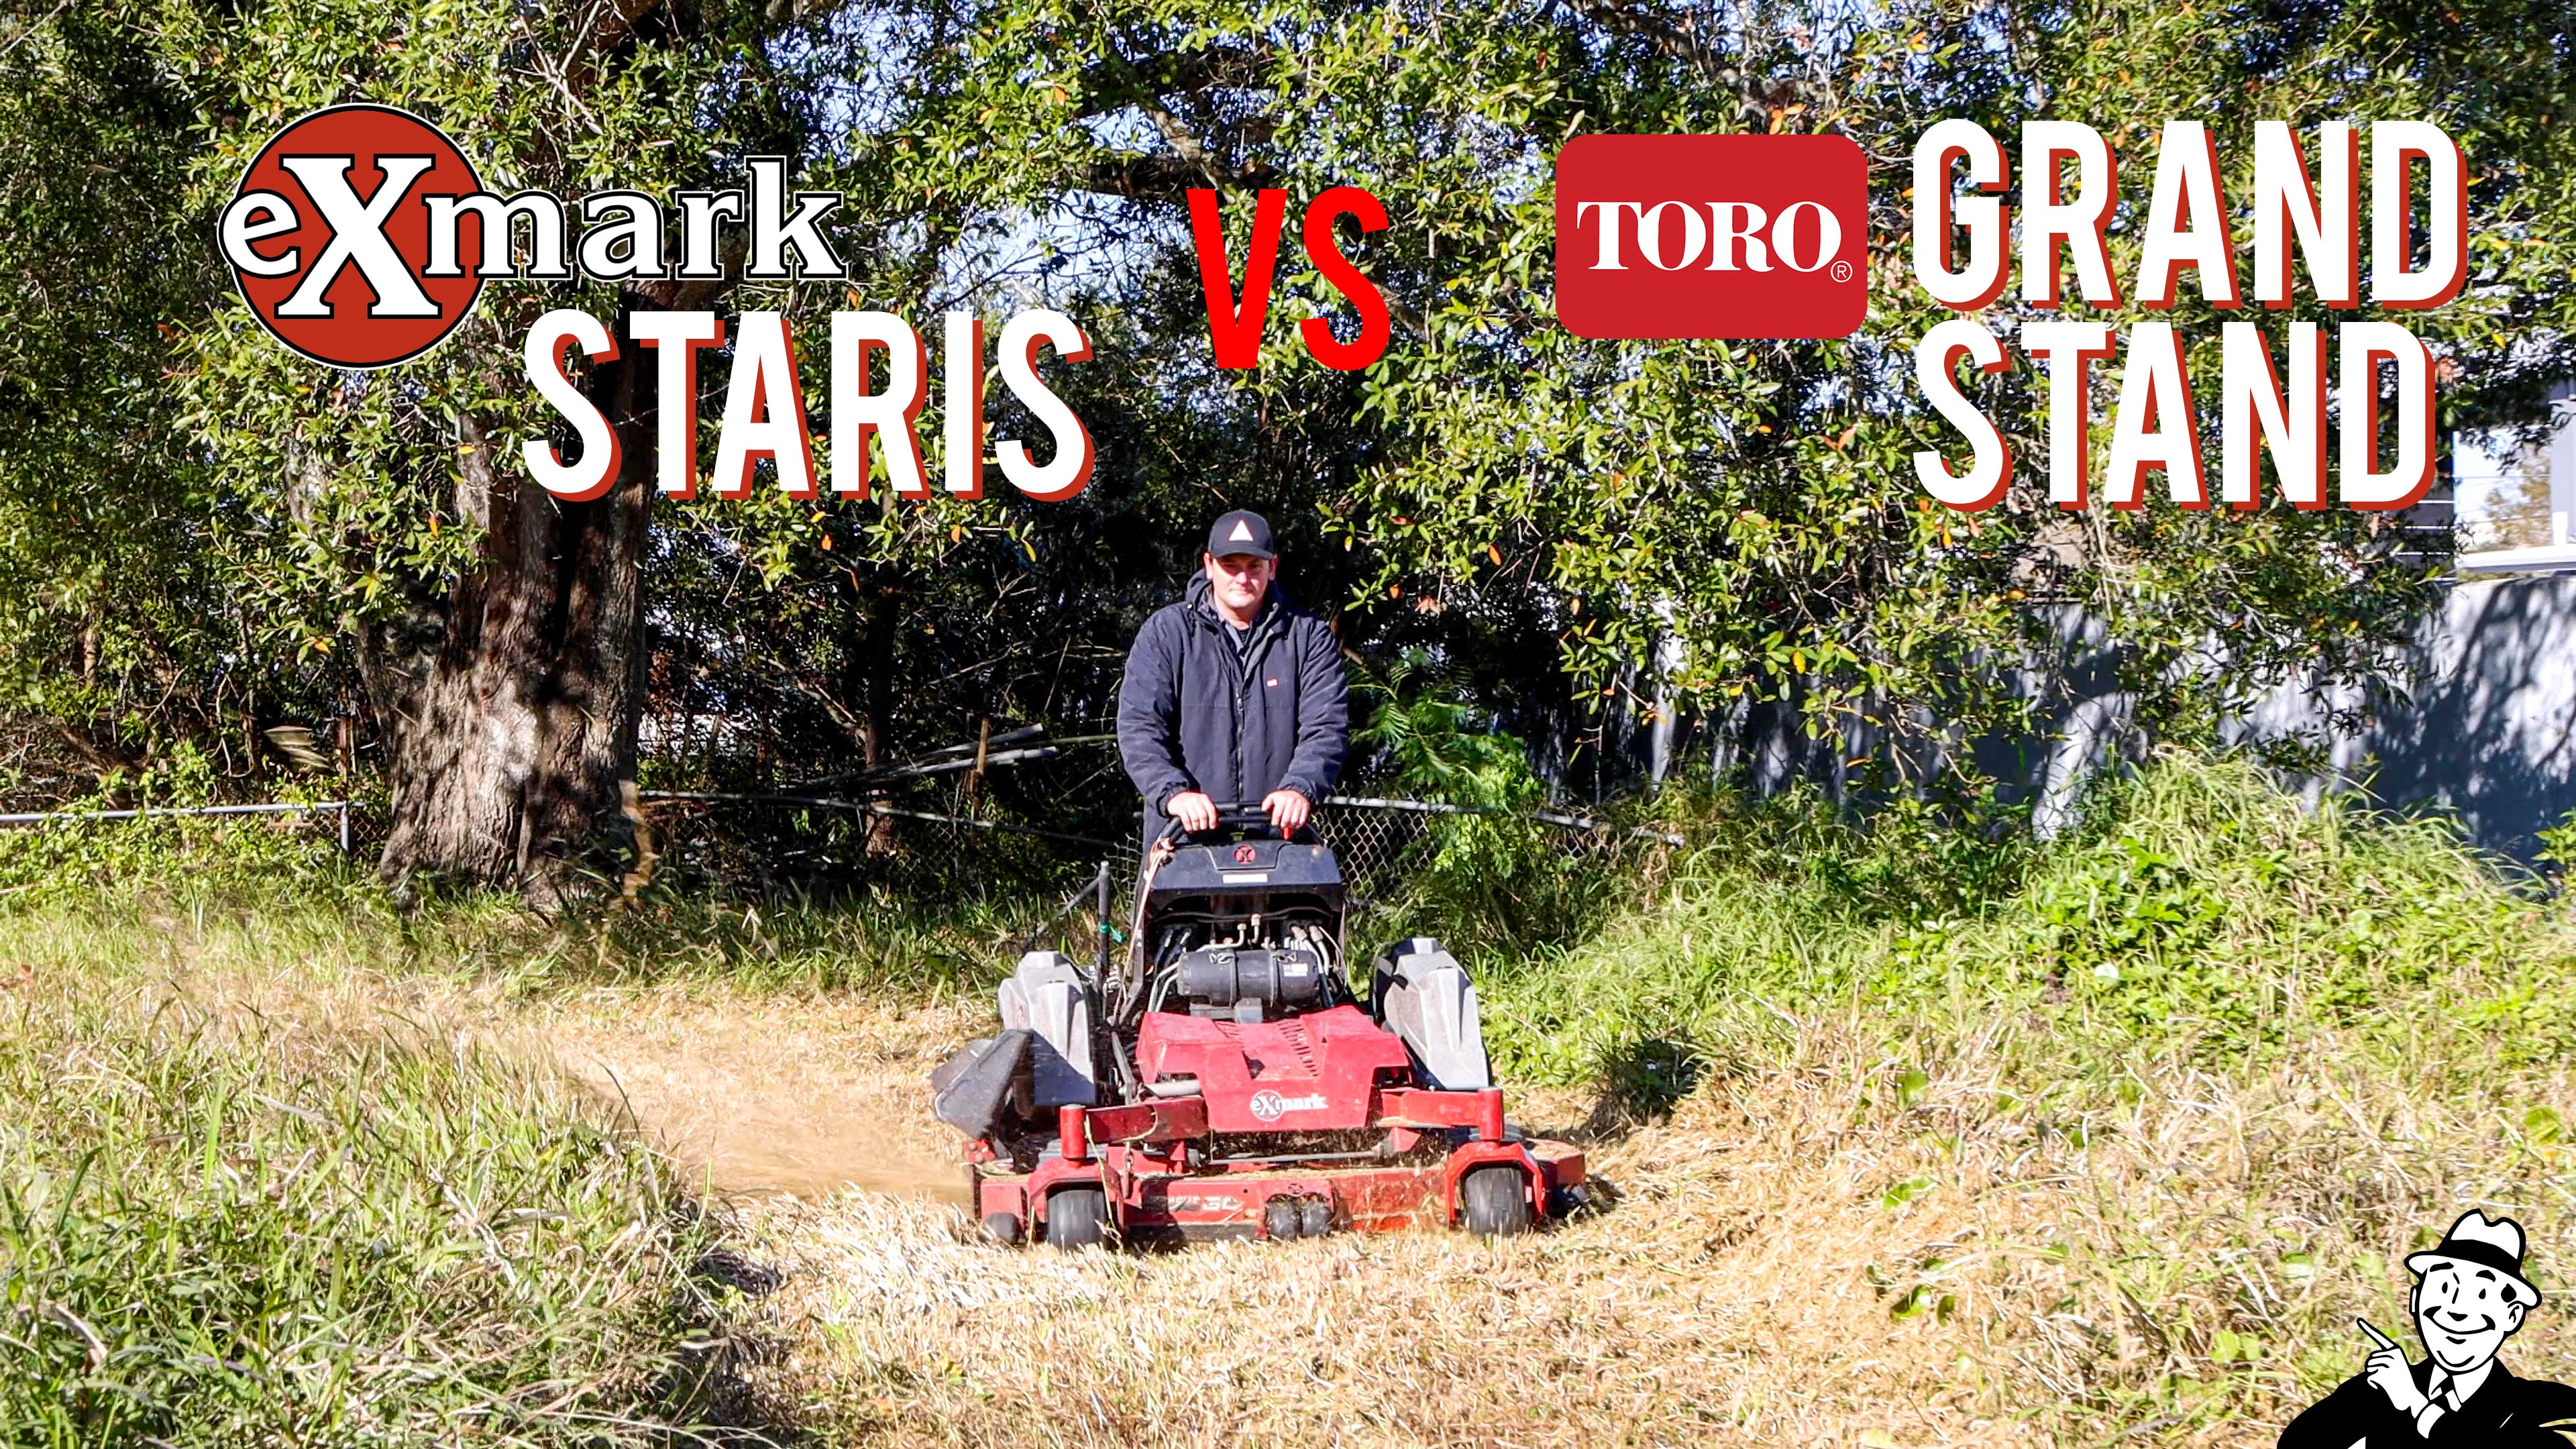 Main Street Mower's Chip tests the performance of a Toro Grand Stand mower against an Exmark Staris in a field with tall grass.